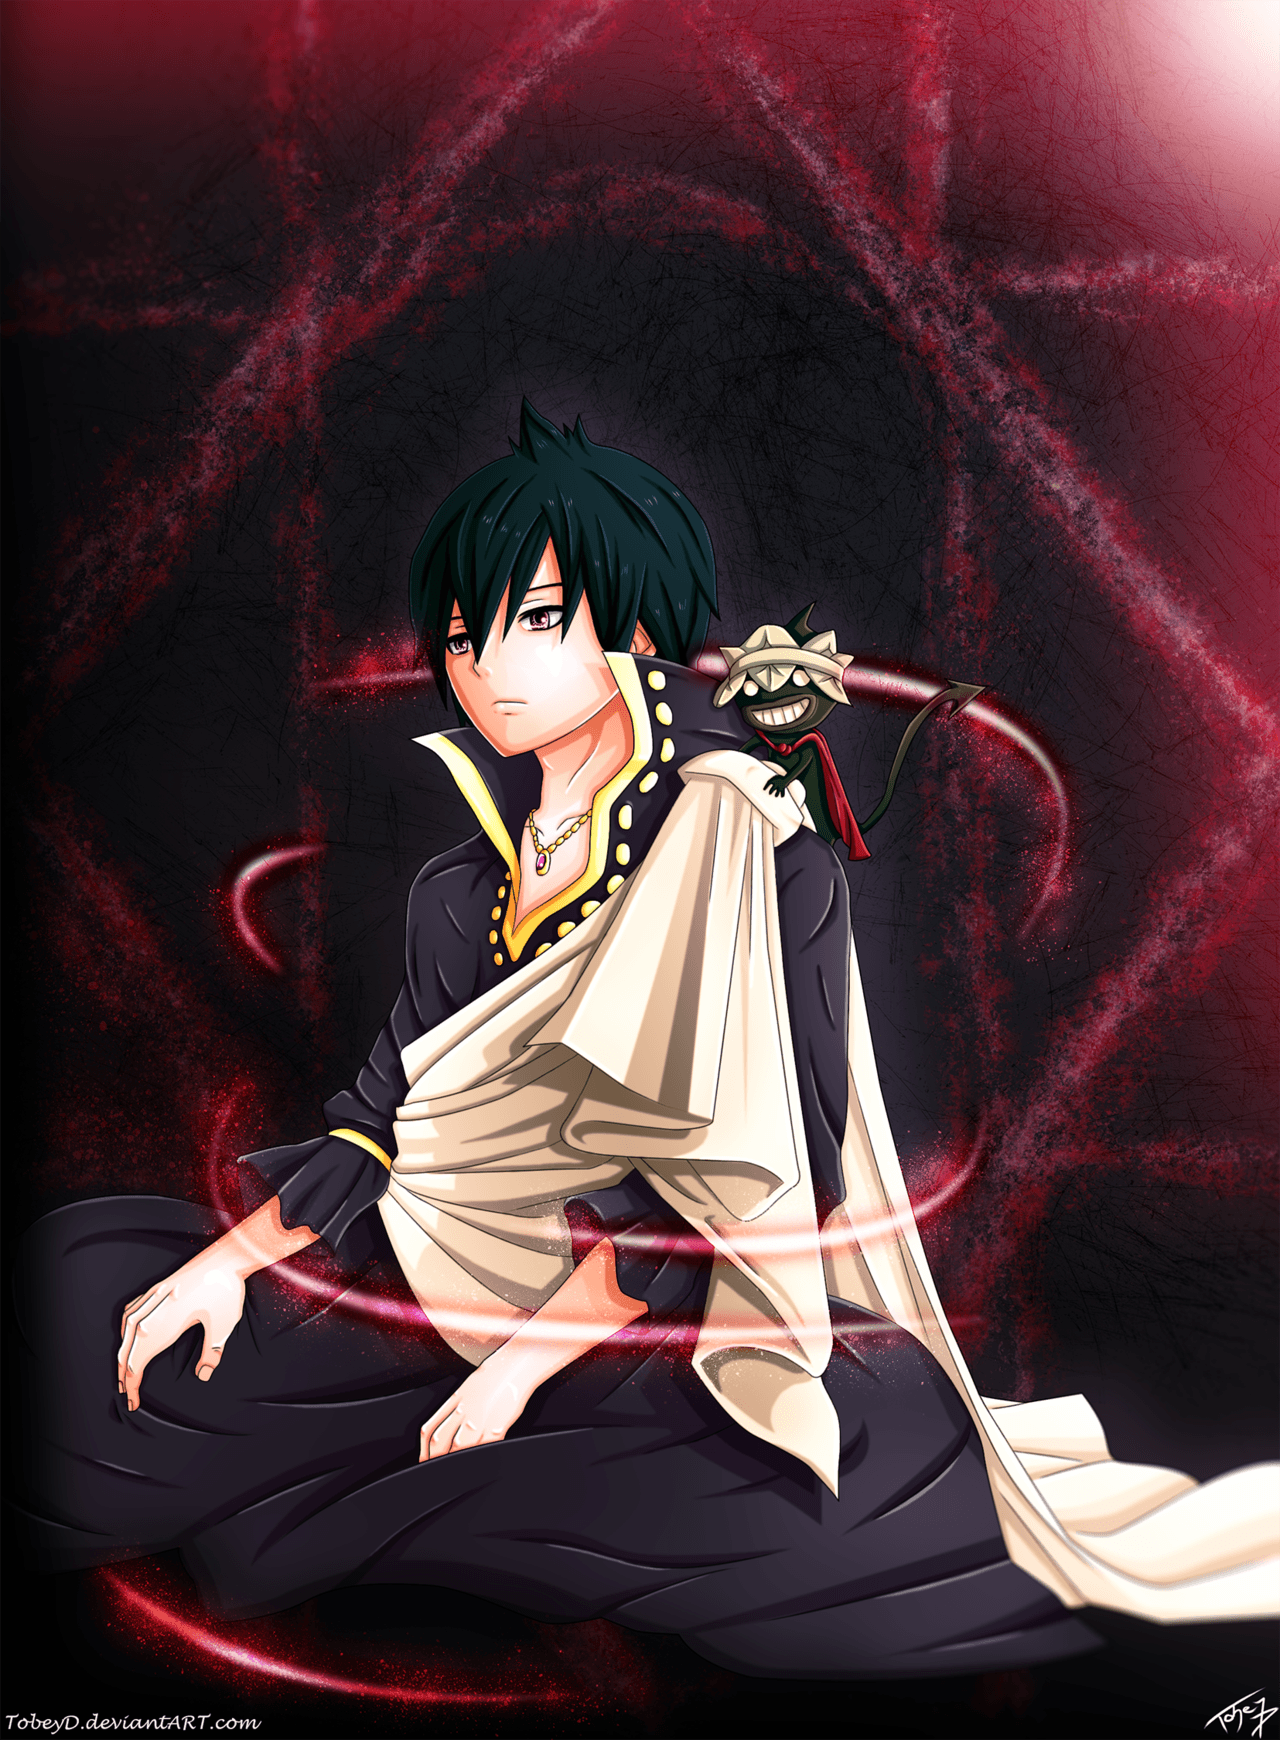 image about Zeref. Dark, Chibi and Posts